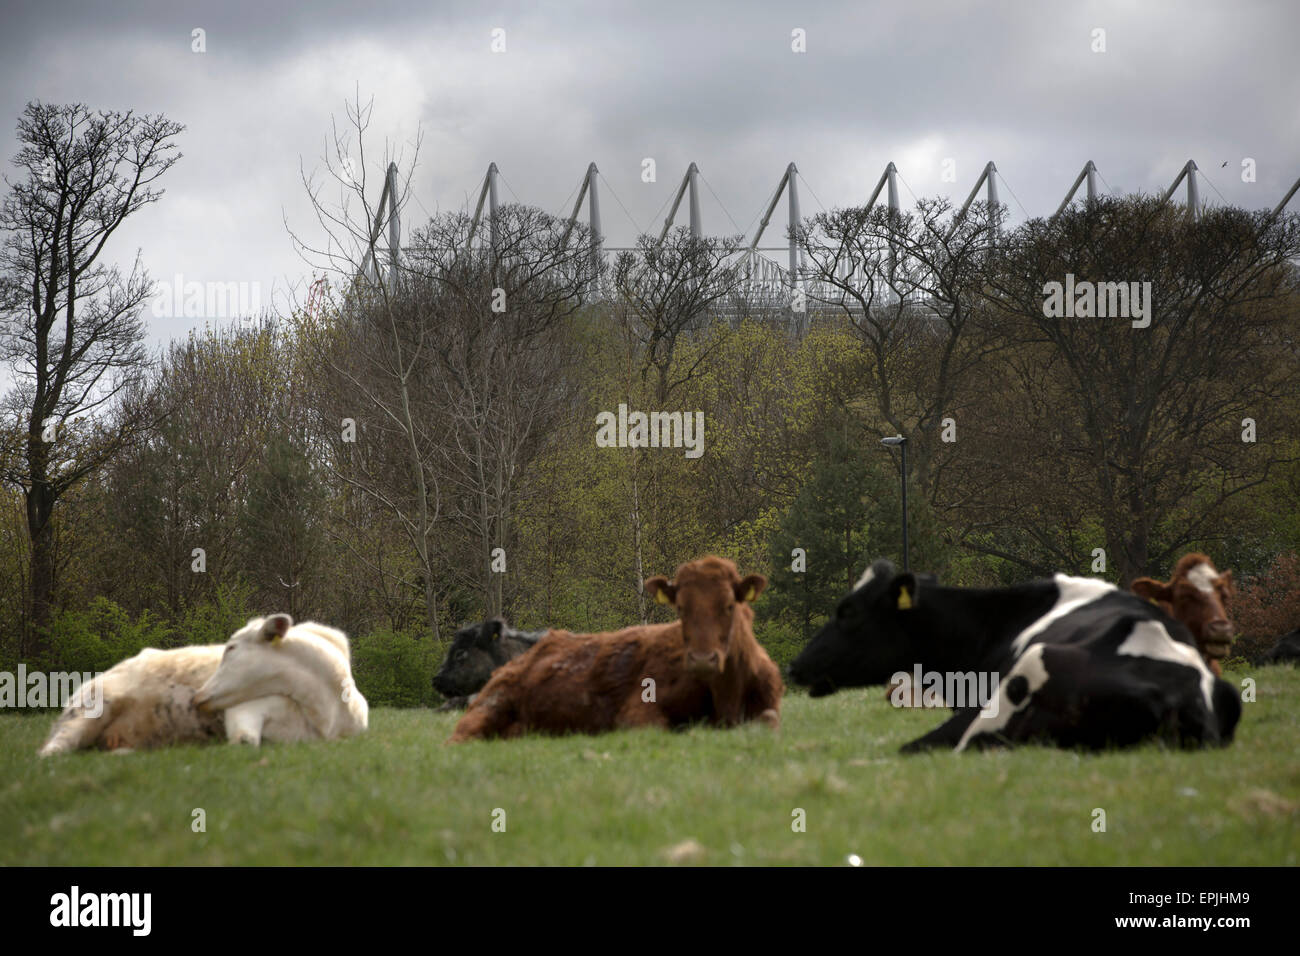 A herd of cattle lying in a field behind the Leazes Stand of the stadium before Newcastle United host Tottenham Hotspurs in an English Premier League match at St. James' Park. The match was boycotted by a section of the home support critical of the role of owner Mike Ashley and sponsorship by a payday loan company. The match was won by Spurs by 3-1, watched by 47,427, the lowest league gate of the season at the stadium. Stock Photo